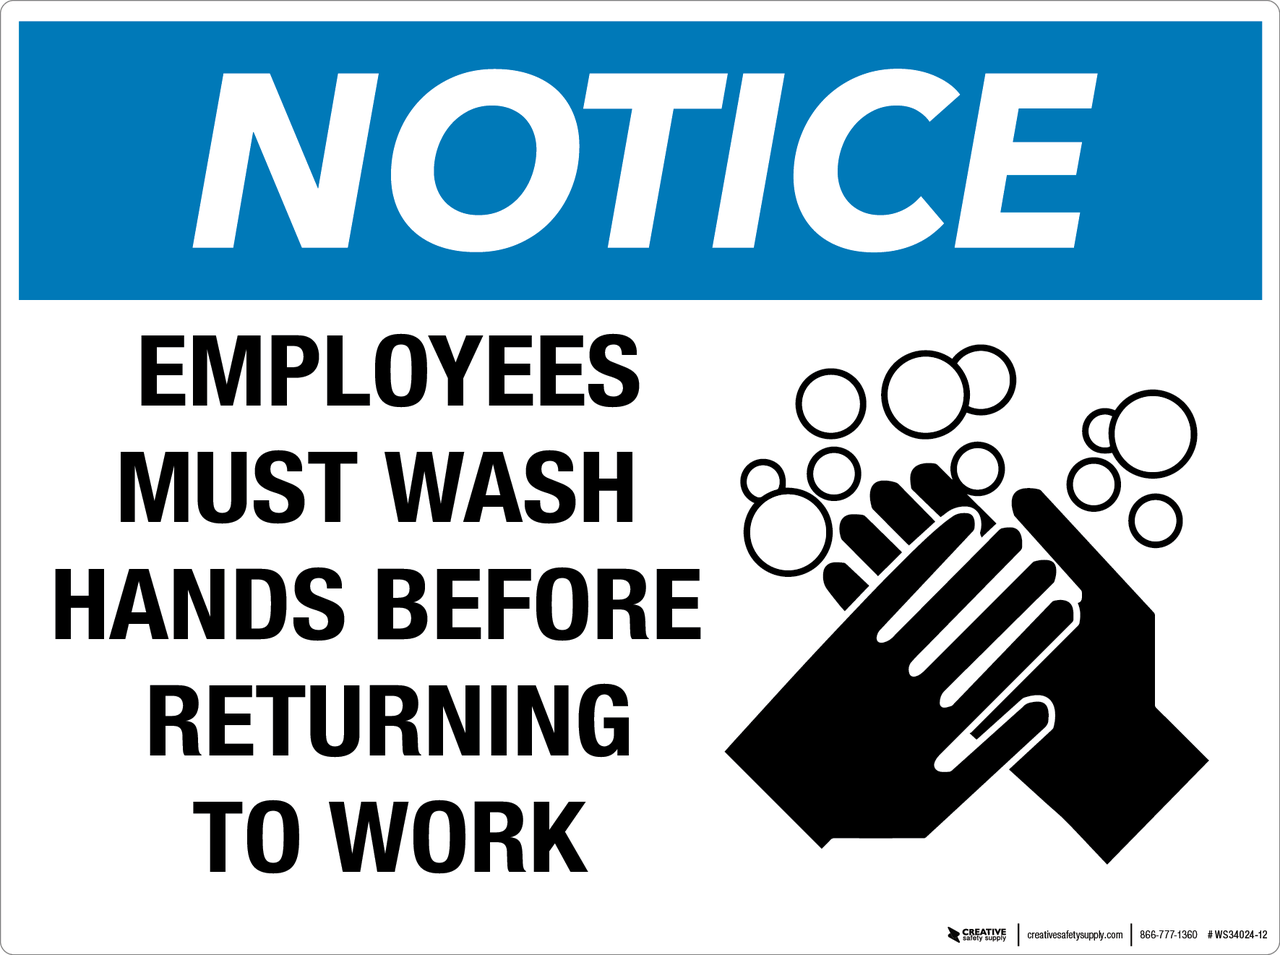 Notice Employees Must Wash Hands Before Returning To Work